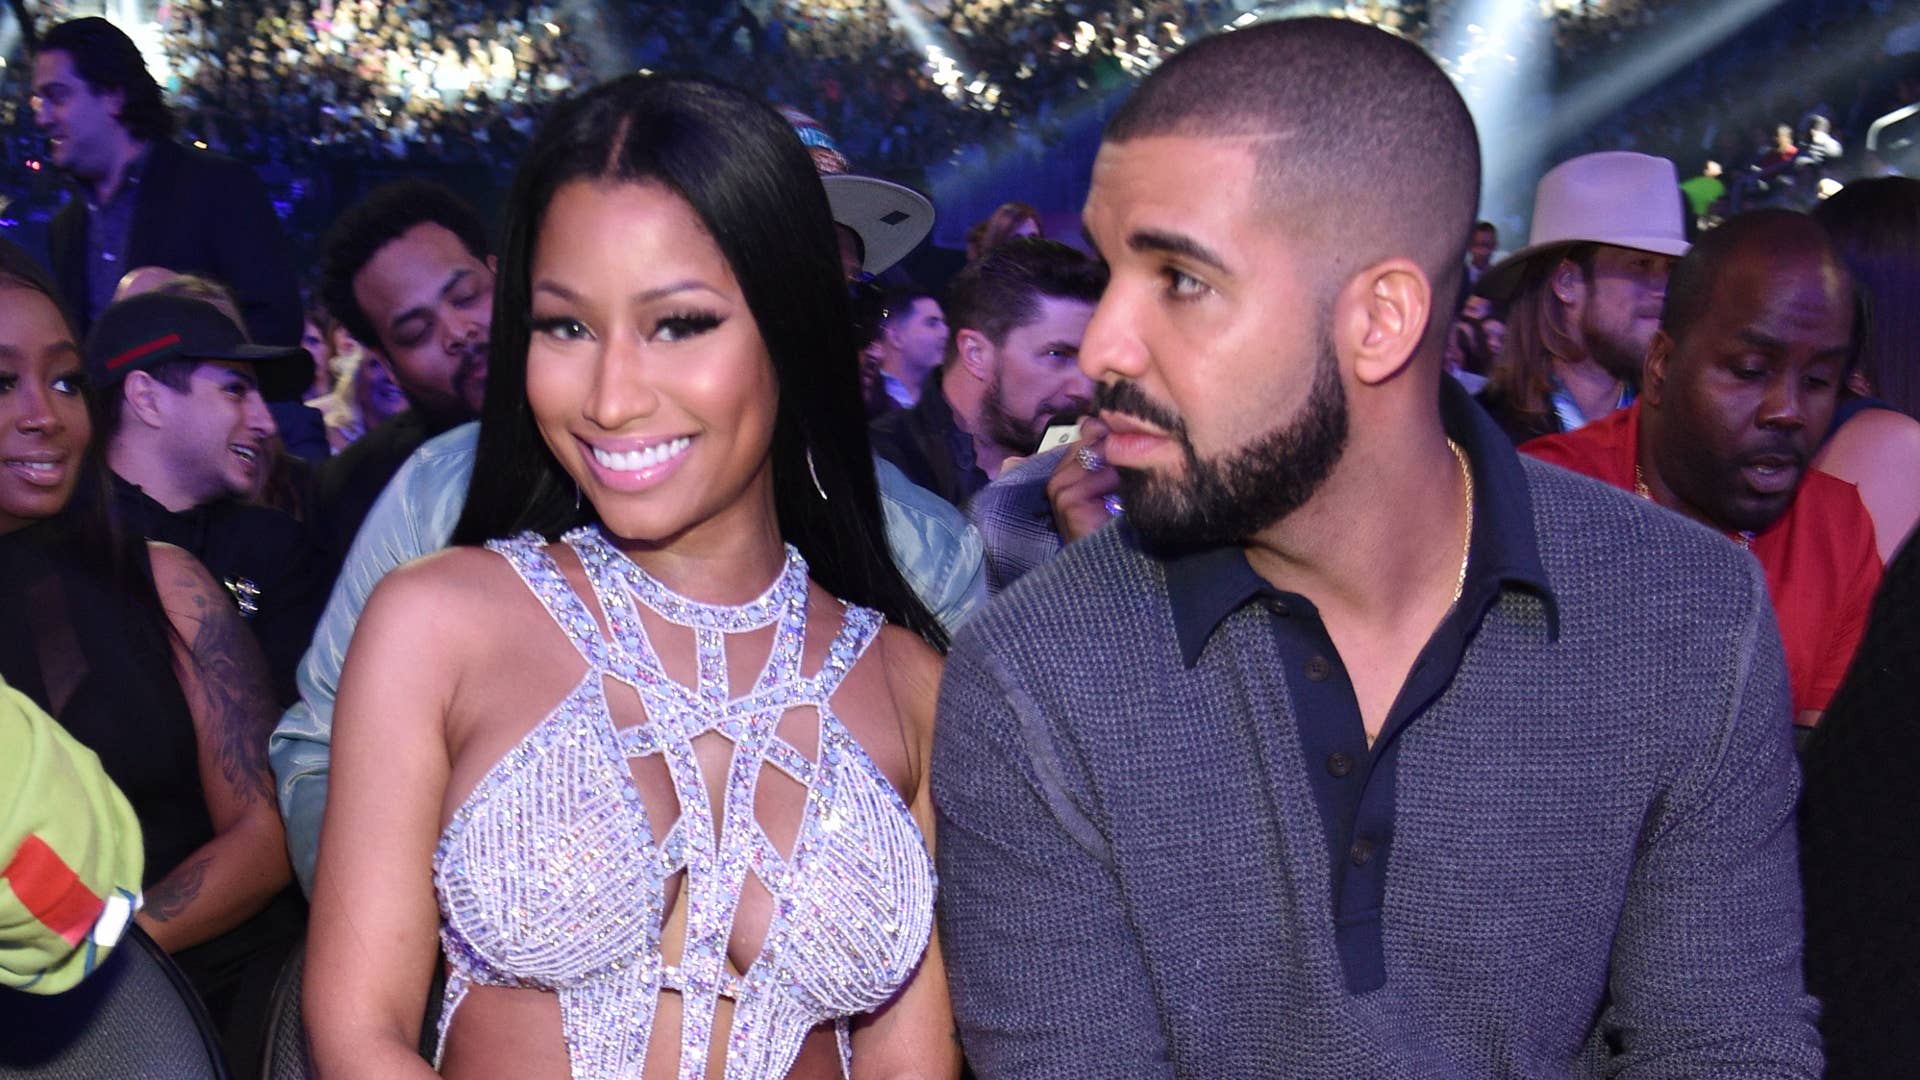 Nicki Minaj and Drake are pictured at an event